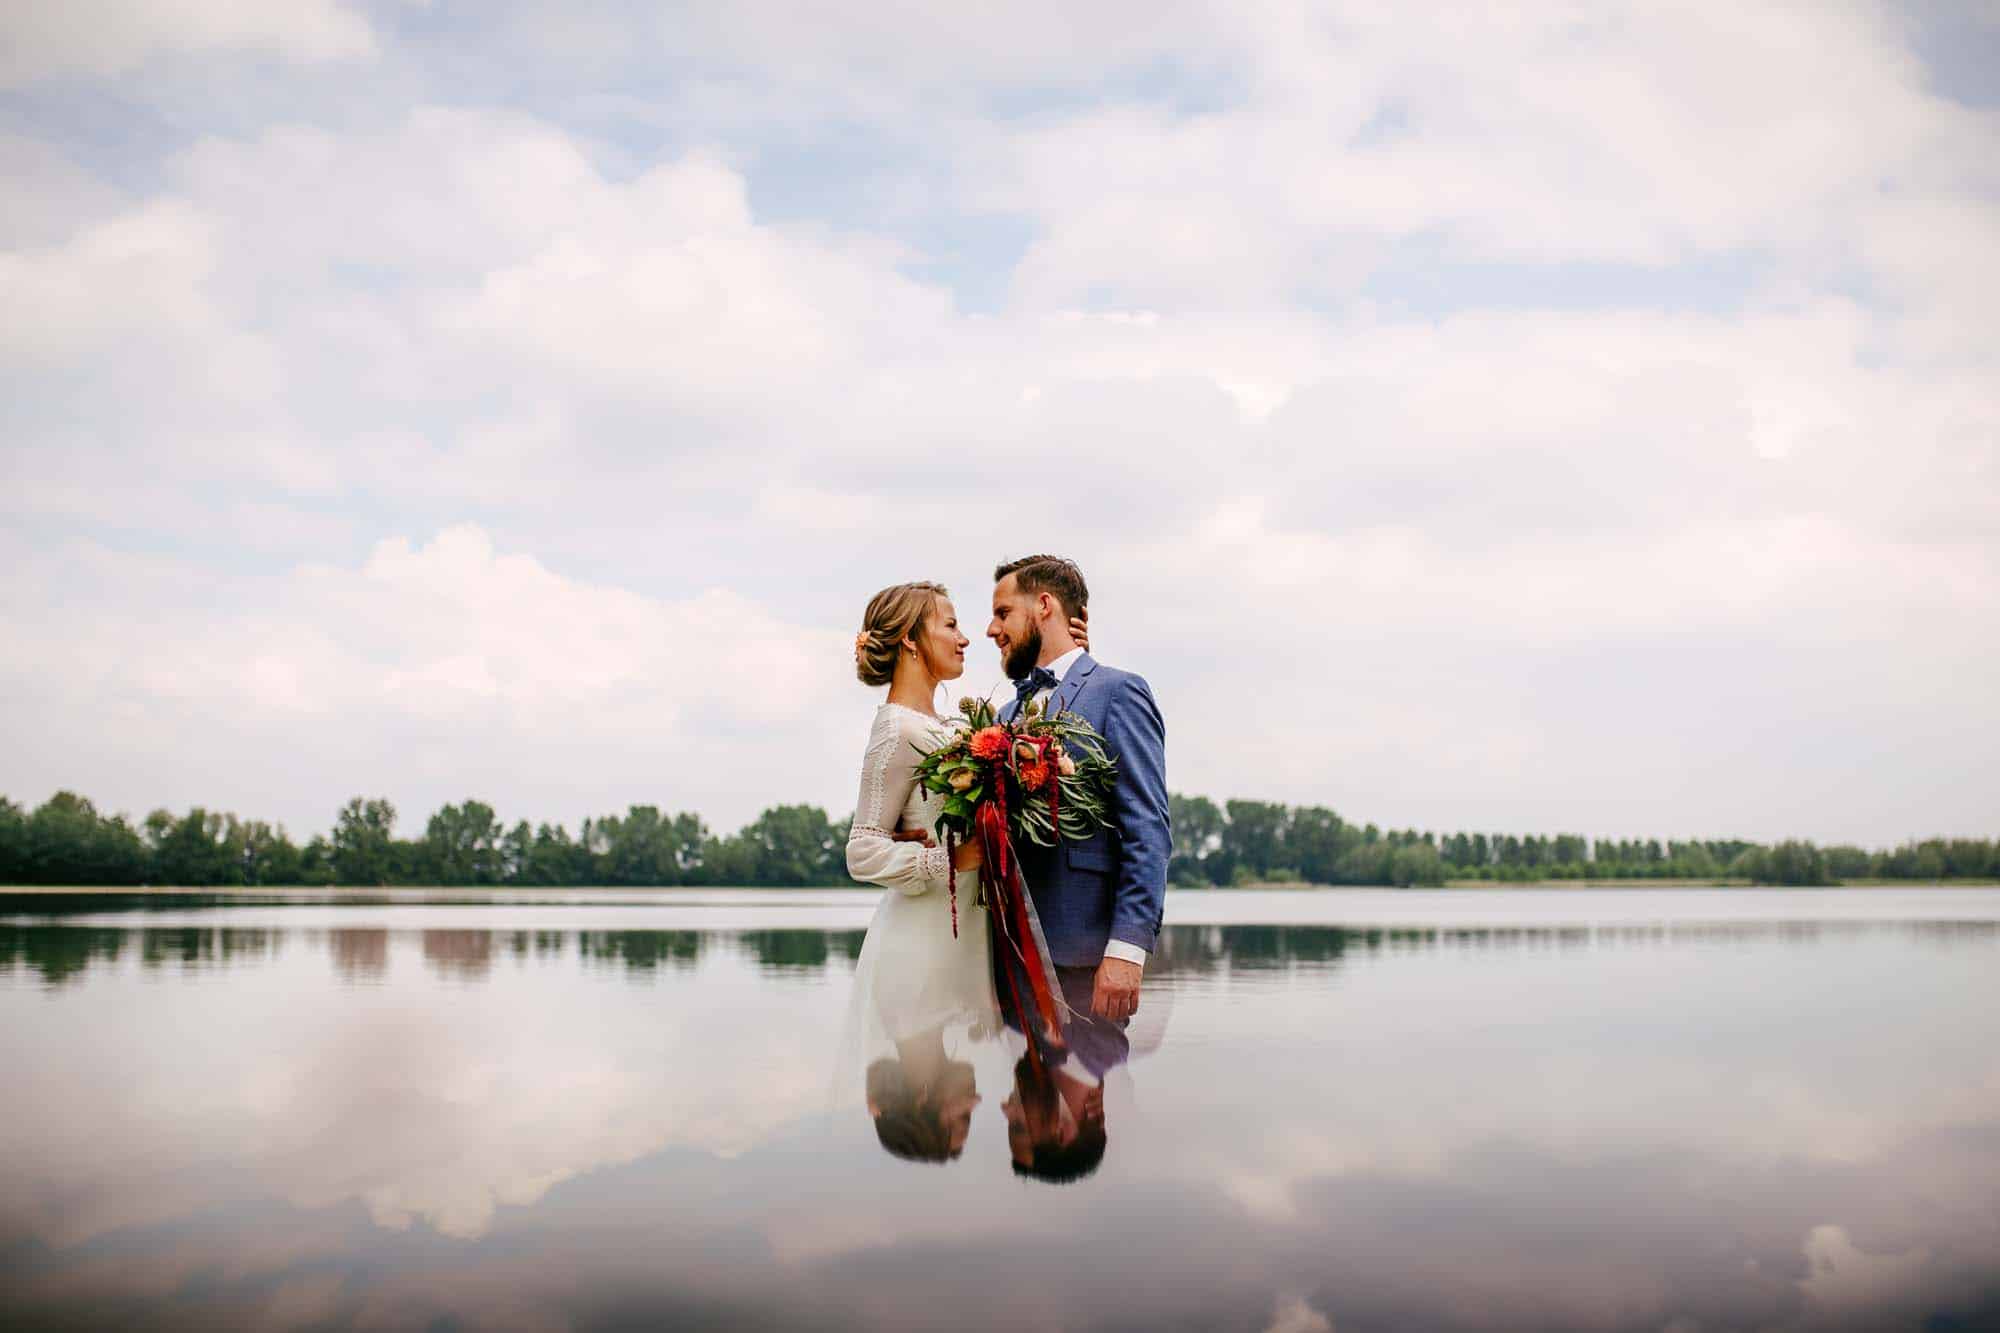 Extraordinary wedding photos of a bride and groom standing in front of a lake.